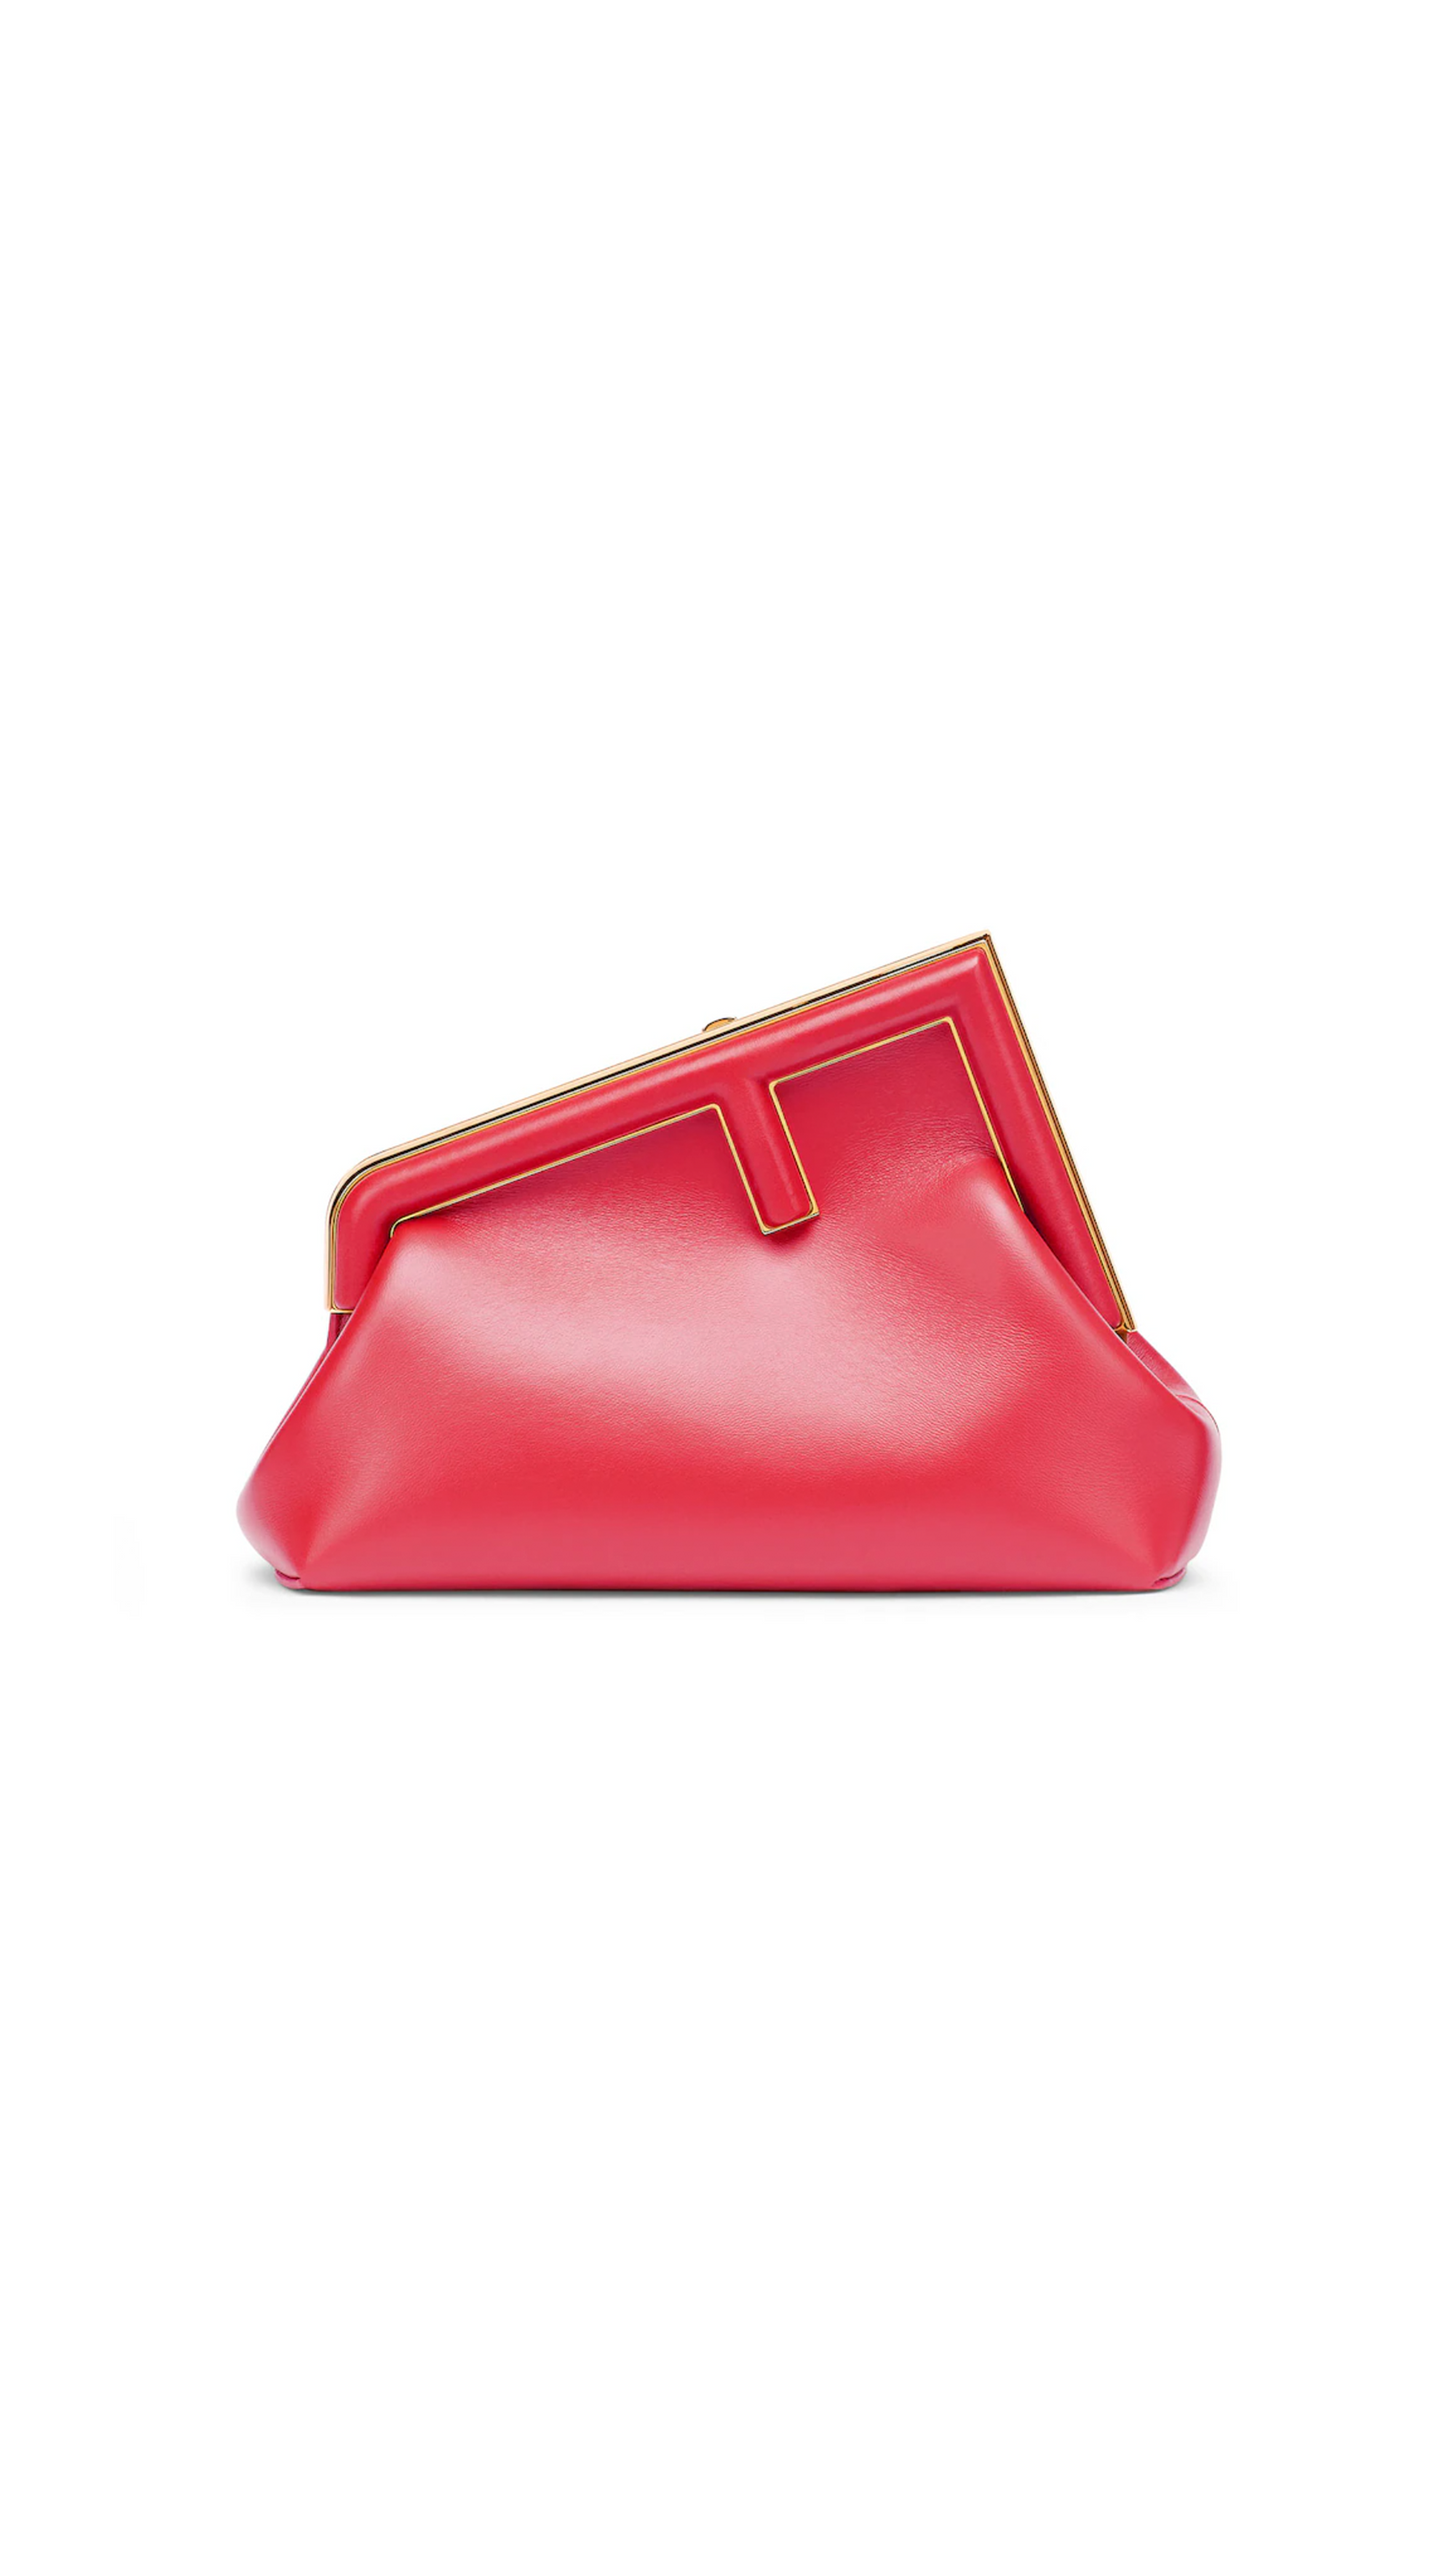 Fendi First Small - Pink leather bag